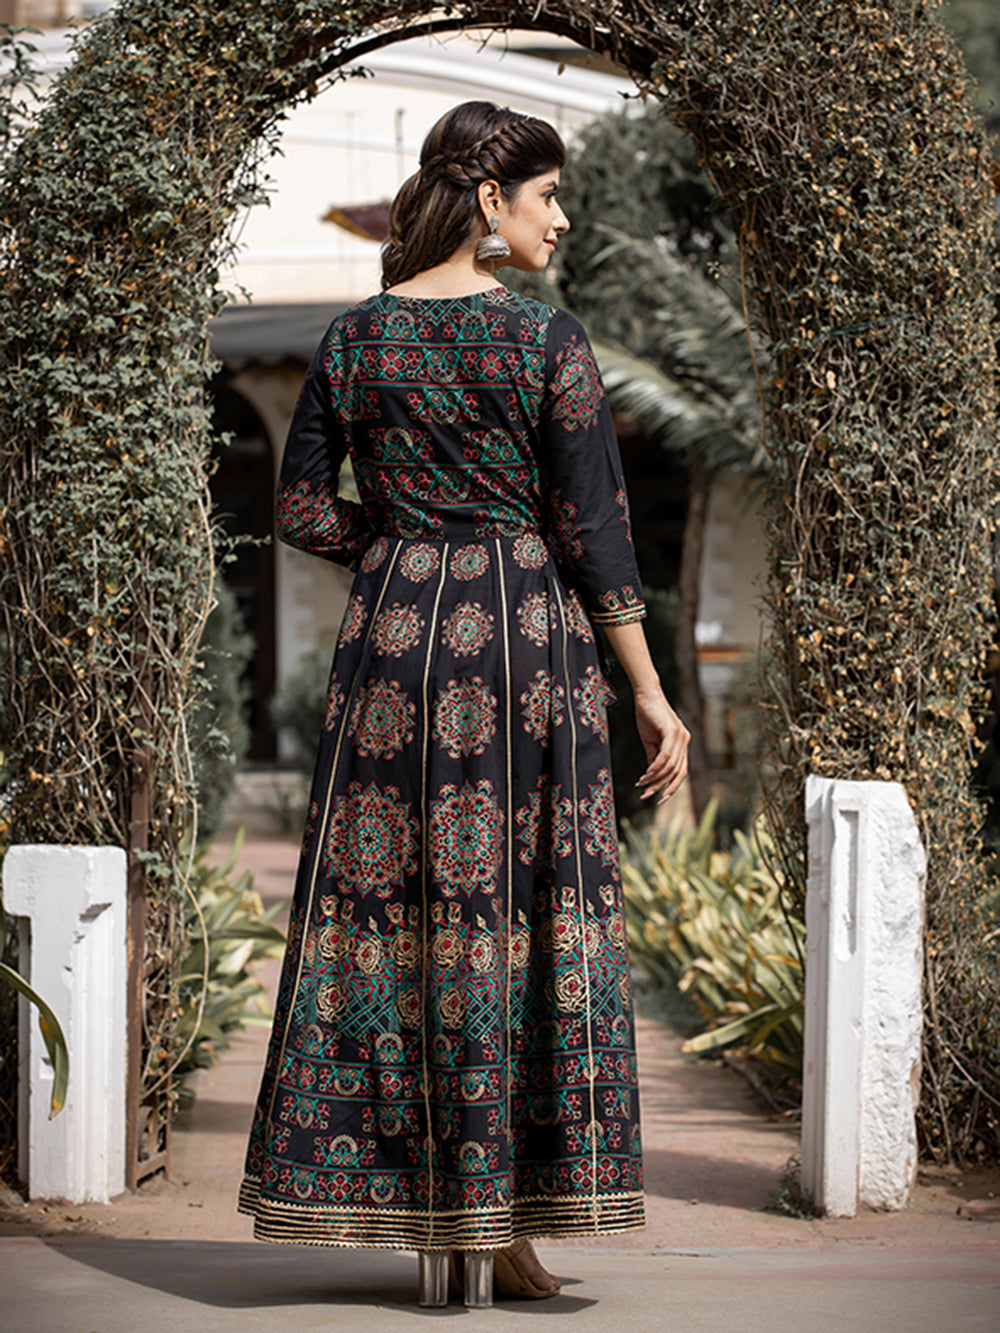 Buy MOHINI CREATION Cotton Ethnic Gown for Womens  Printed Dress  Ethnic  Wear  Jaipuri Print  Long Maxi Dress  Full Length  Western Dress  One  Piece Rayon Dress Multicolour at Amazonin